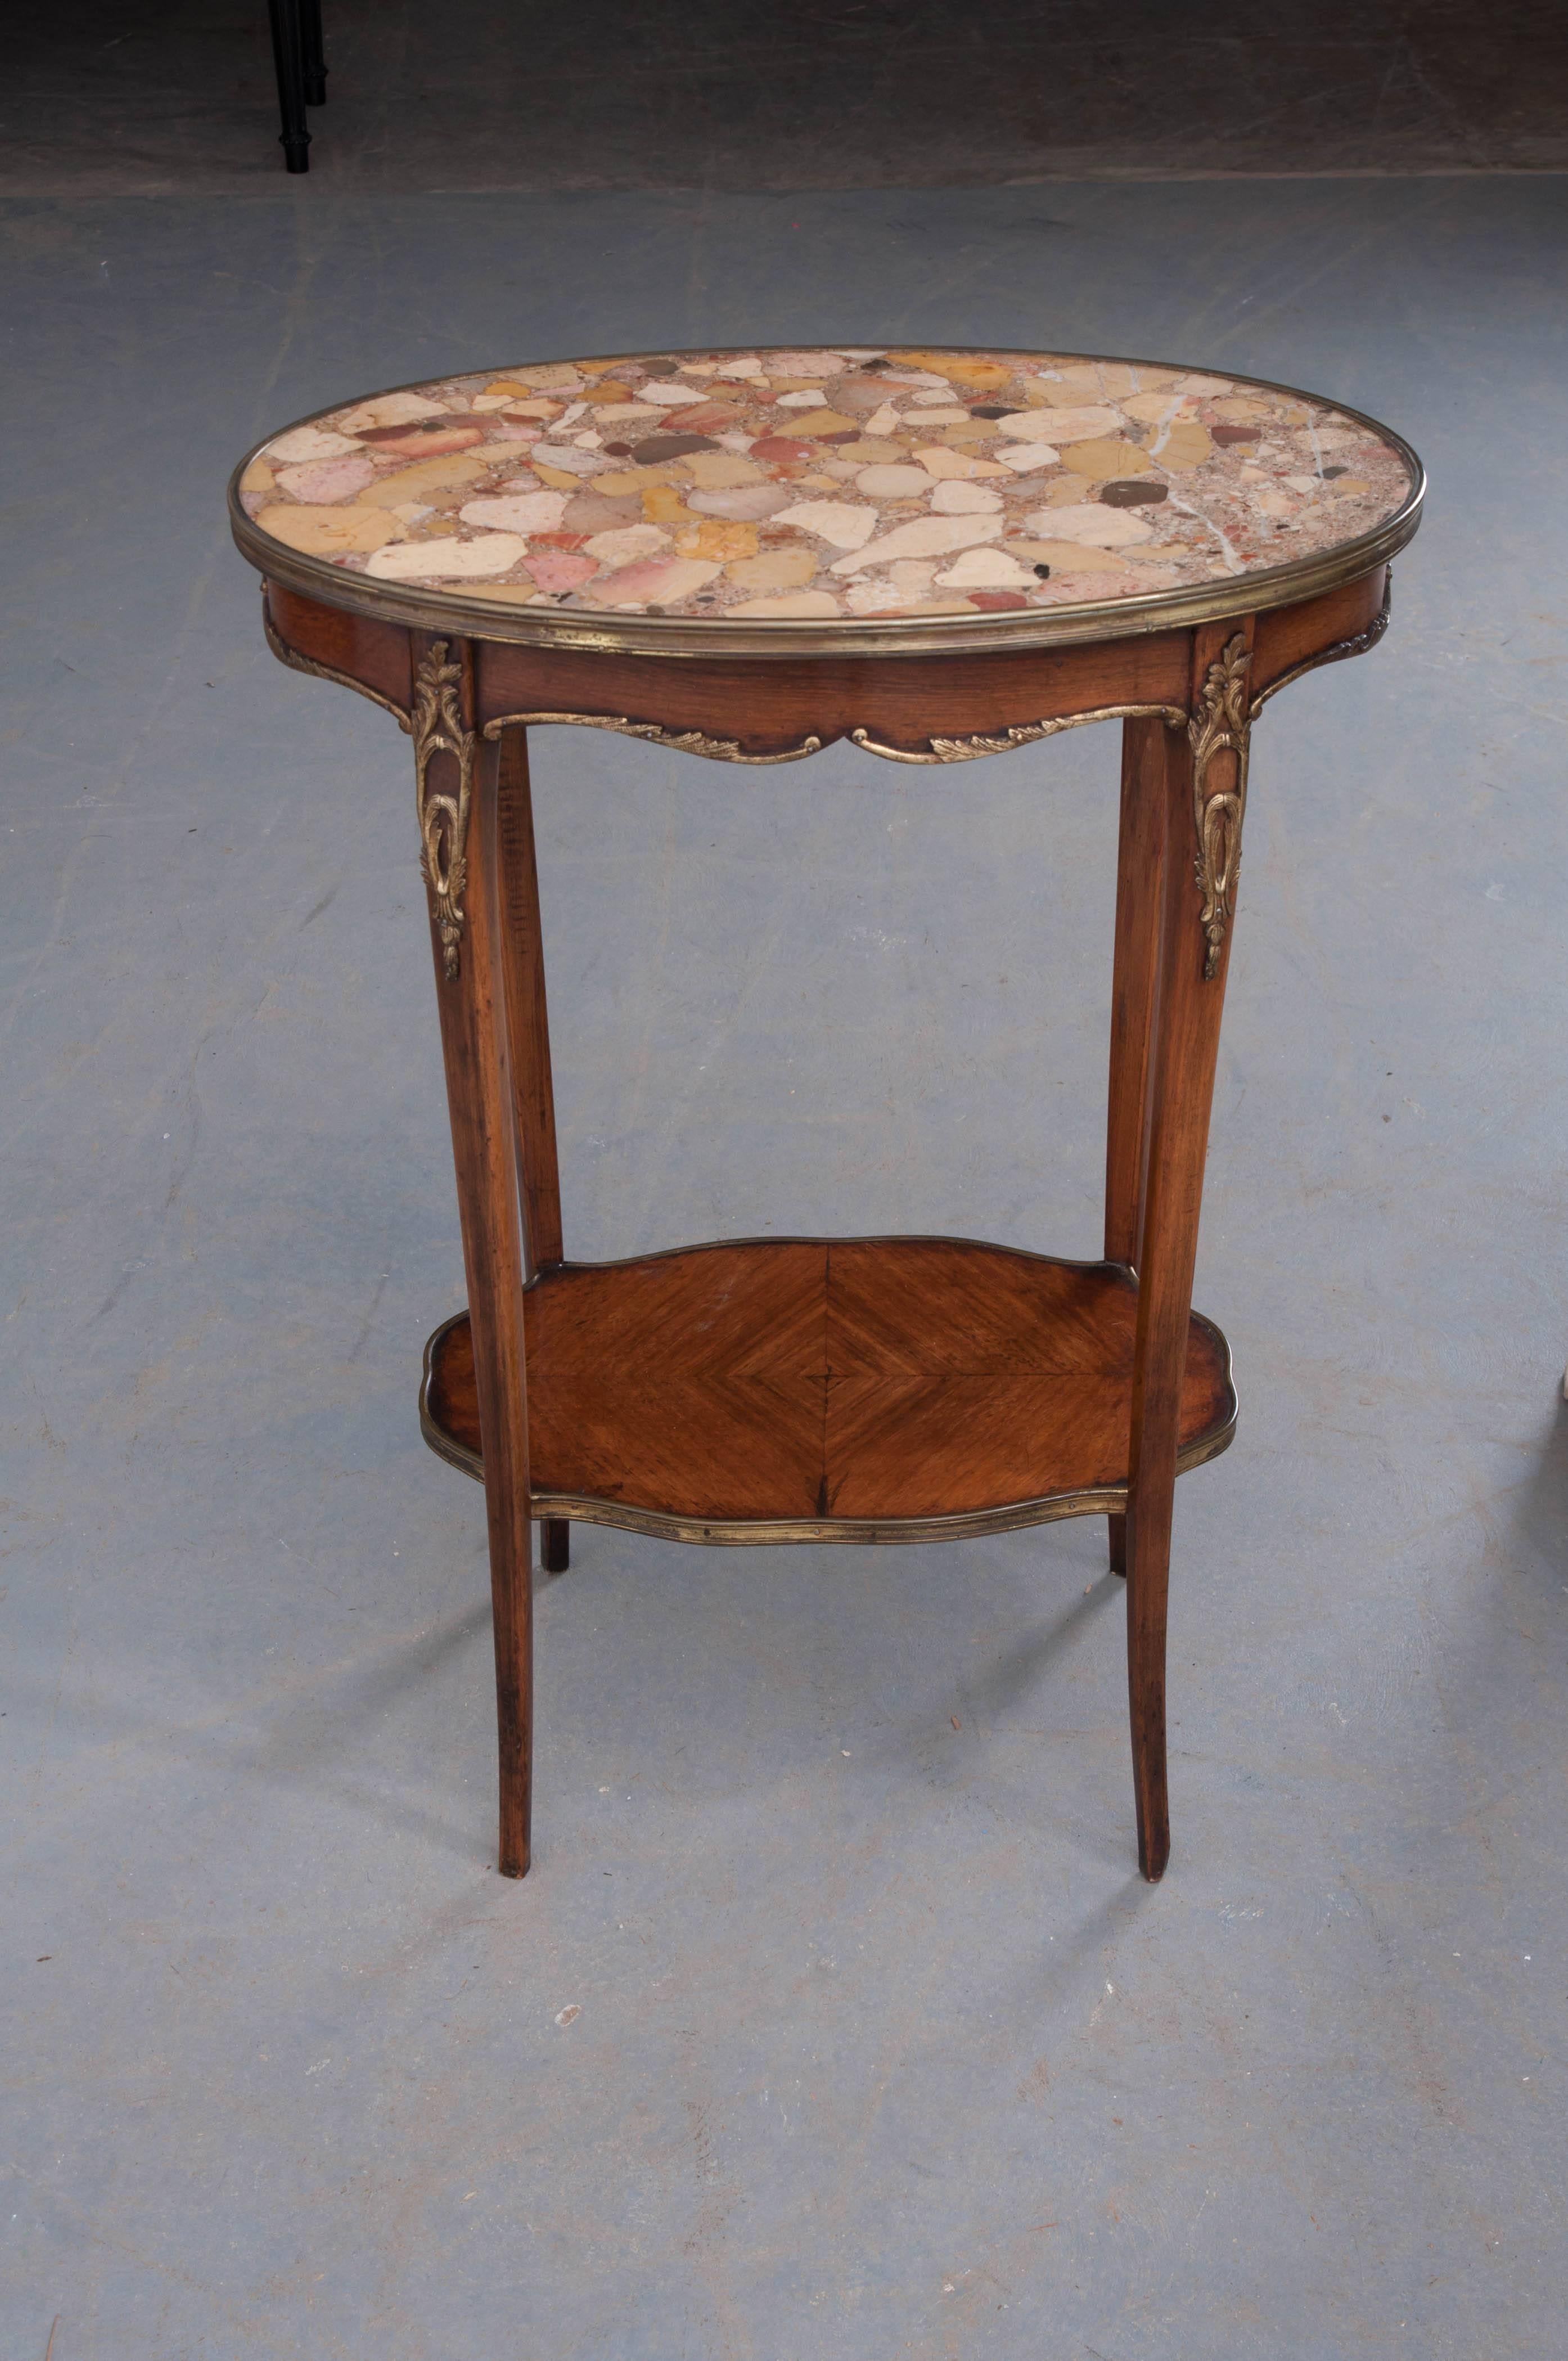 A darling mahogany Louis XV style table, with marble top, from the end of the 19th century, France. The table is topped with a beautiful oval piece of brèche d'Alep marble that is inset and secured with a band of brass. The shaped mahogany apron as